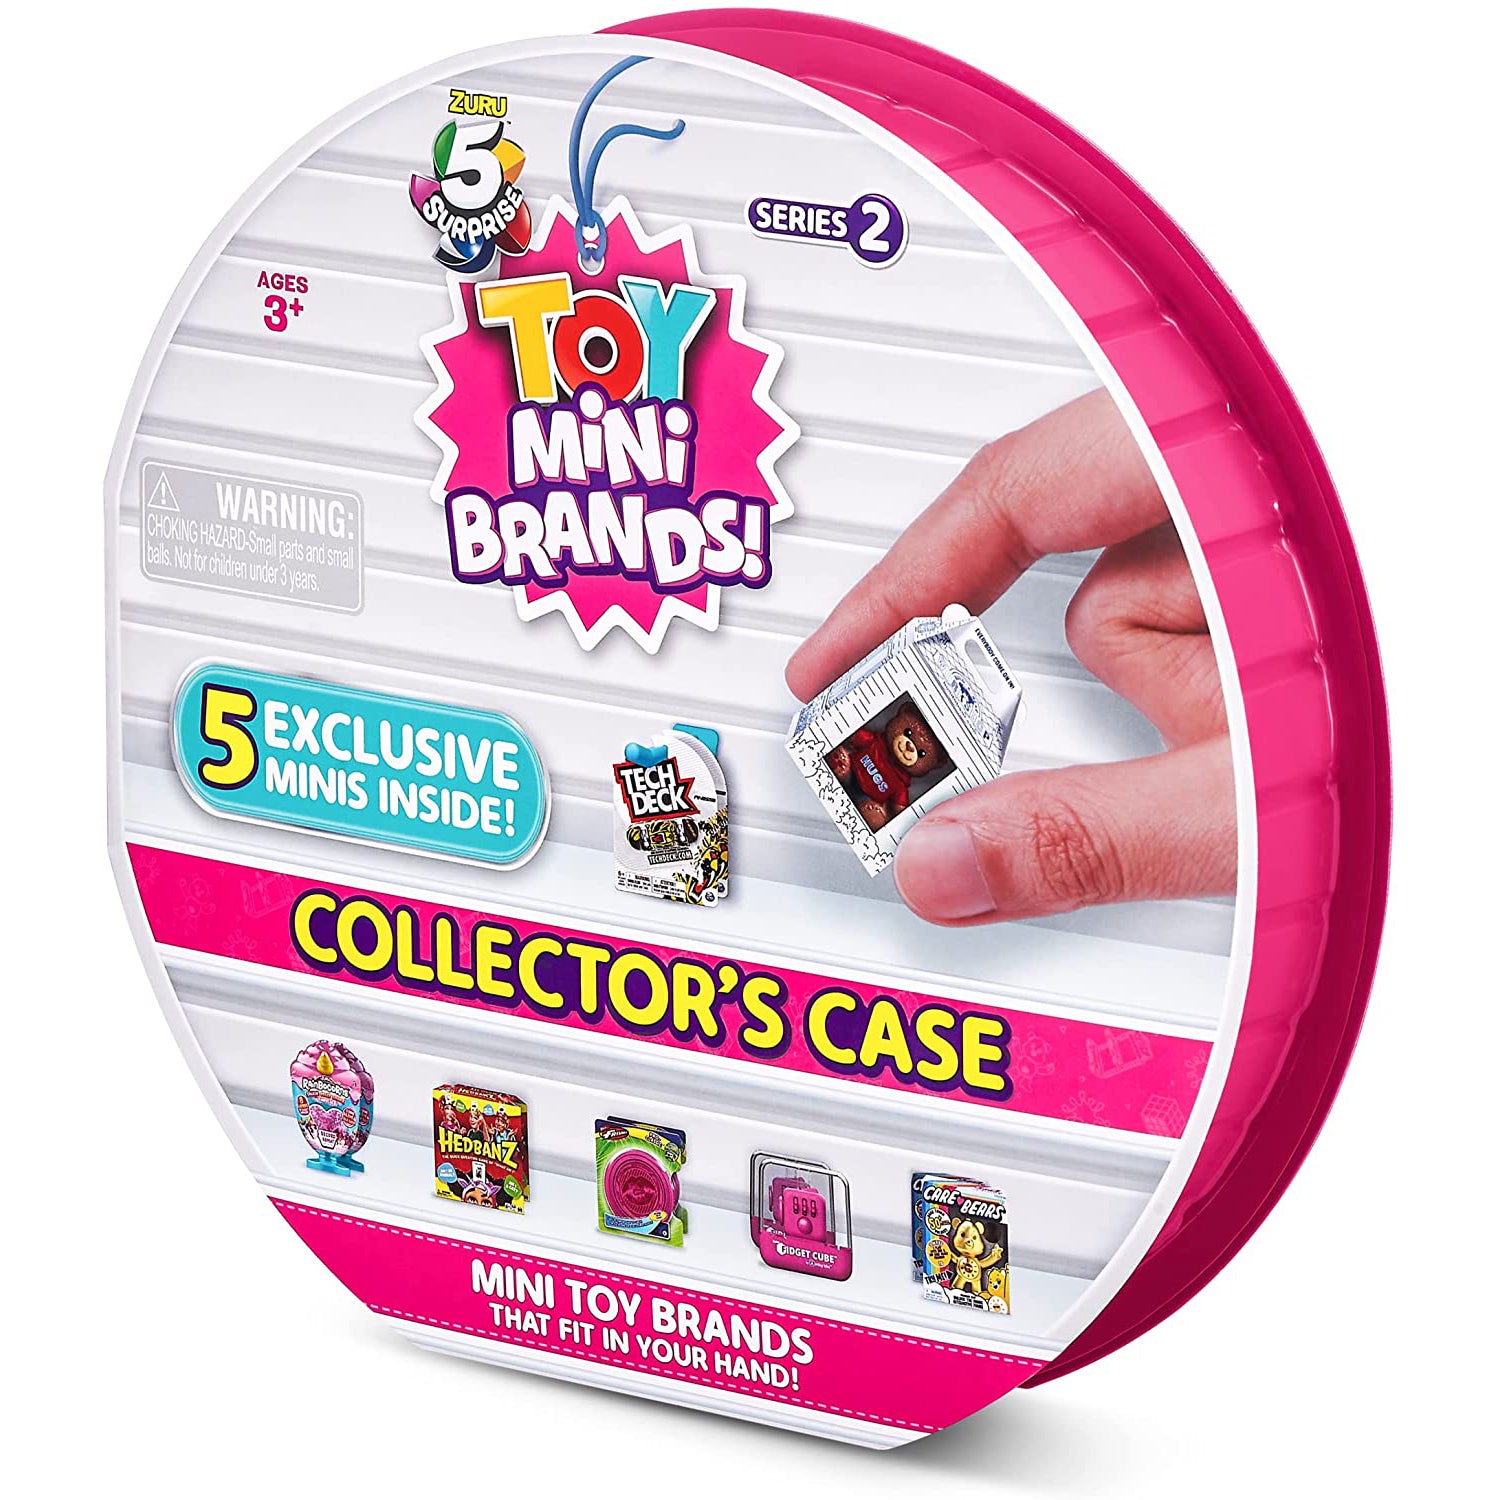 5 Surprise Mini Brands Series 5 Collector's Case with 5 Exclusive Minis Novelty & Gag Toy by Zuru